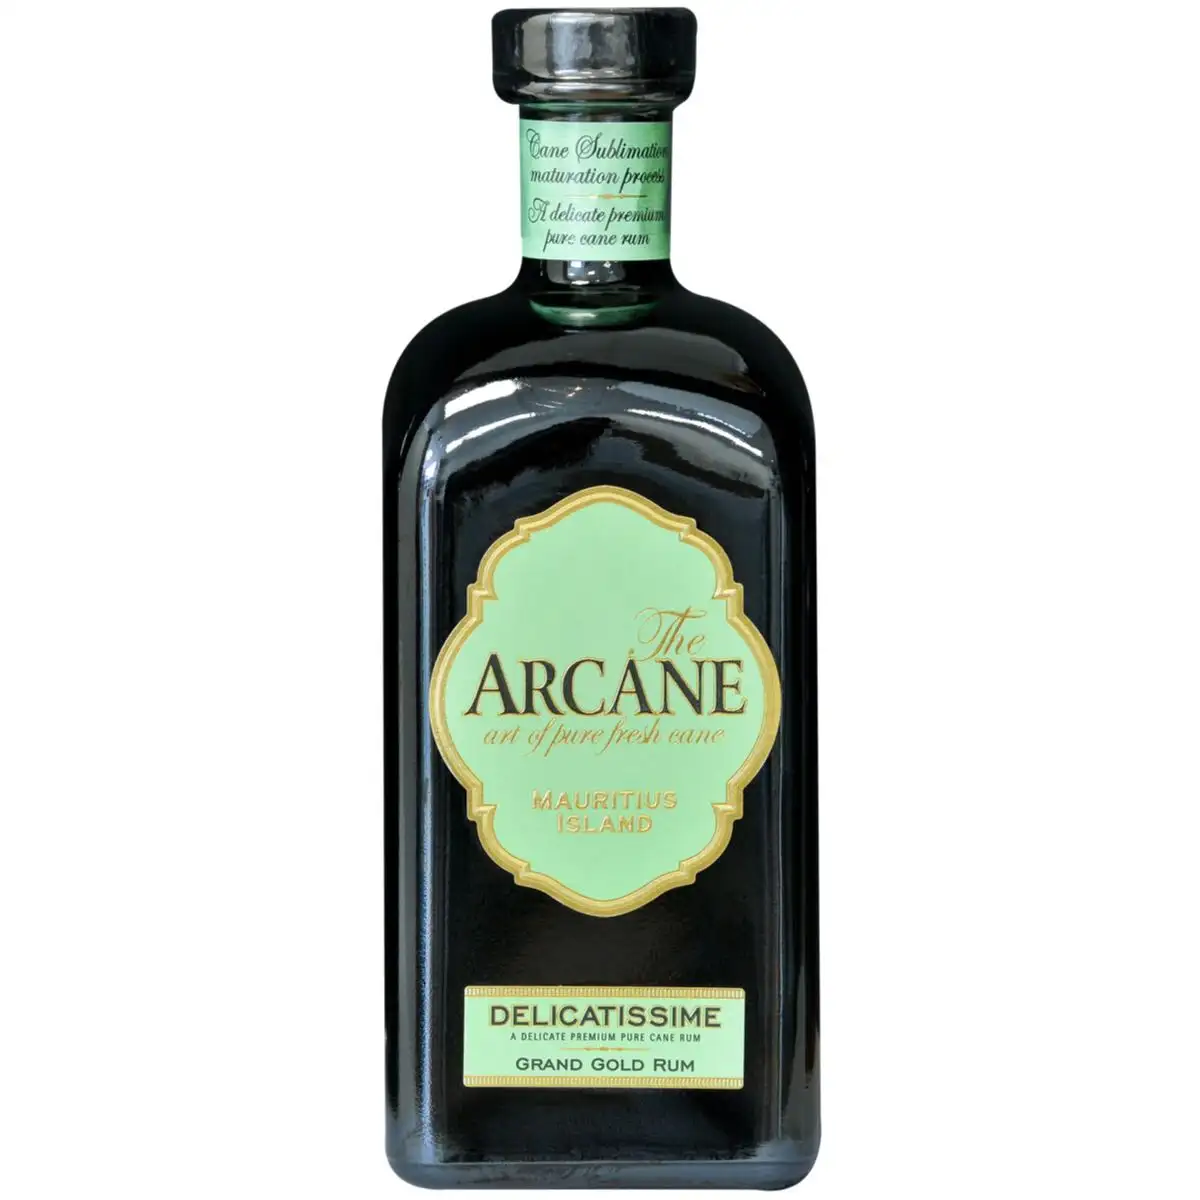 Image of the front of the bottle of the rum Arcane Delicatissime Grand Gold